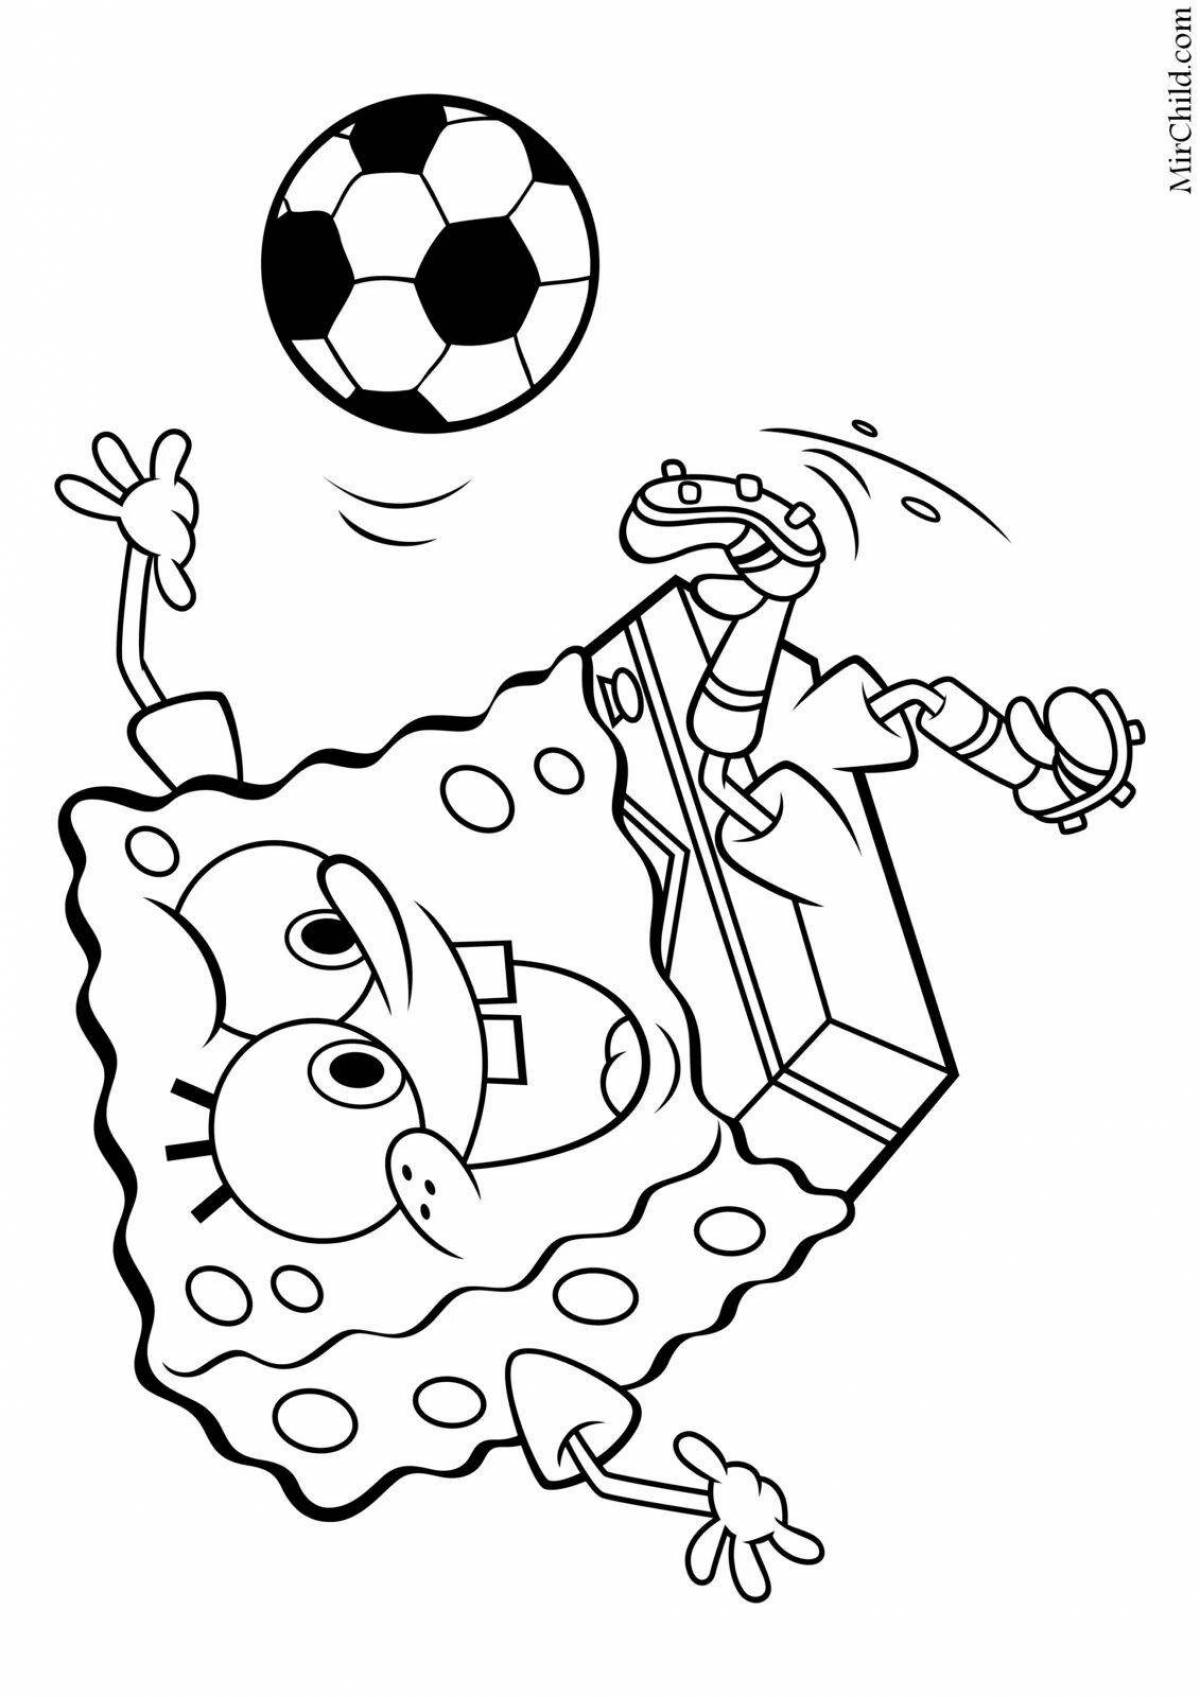 Courageous football players coloring page